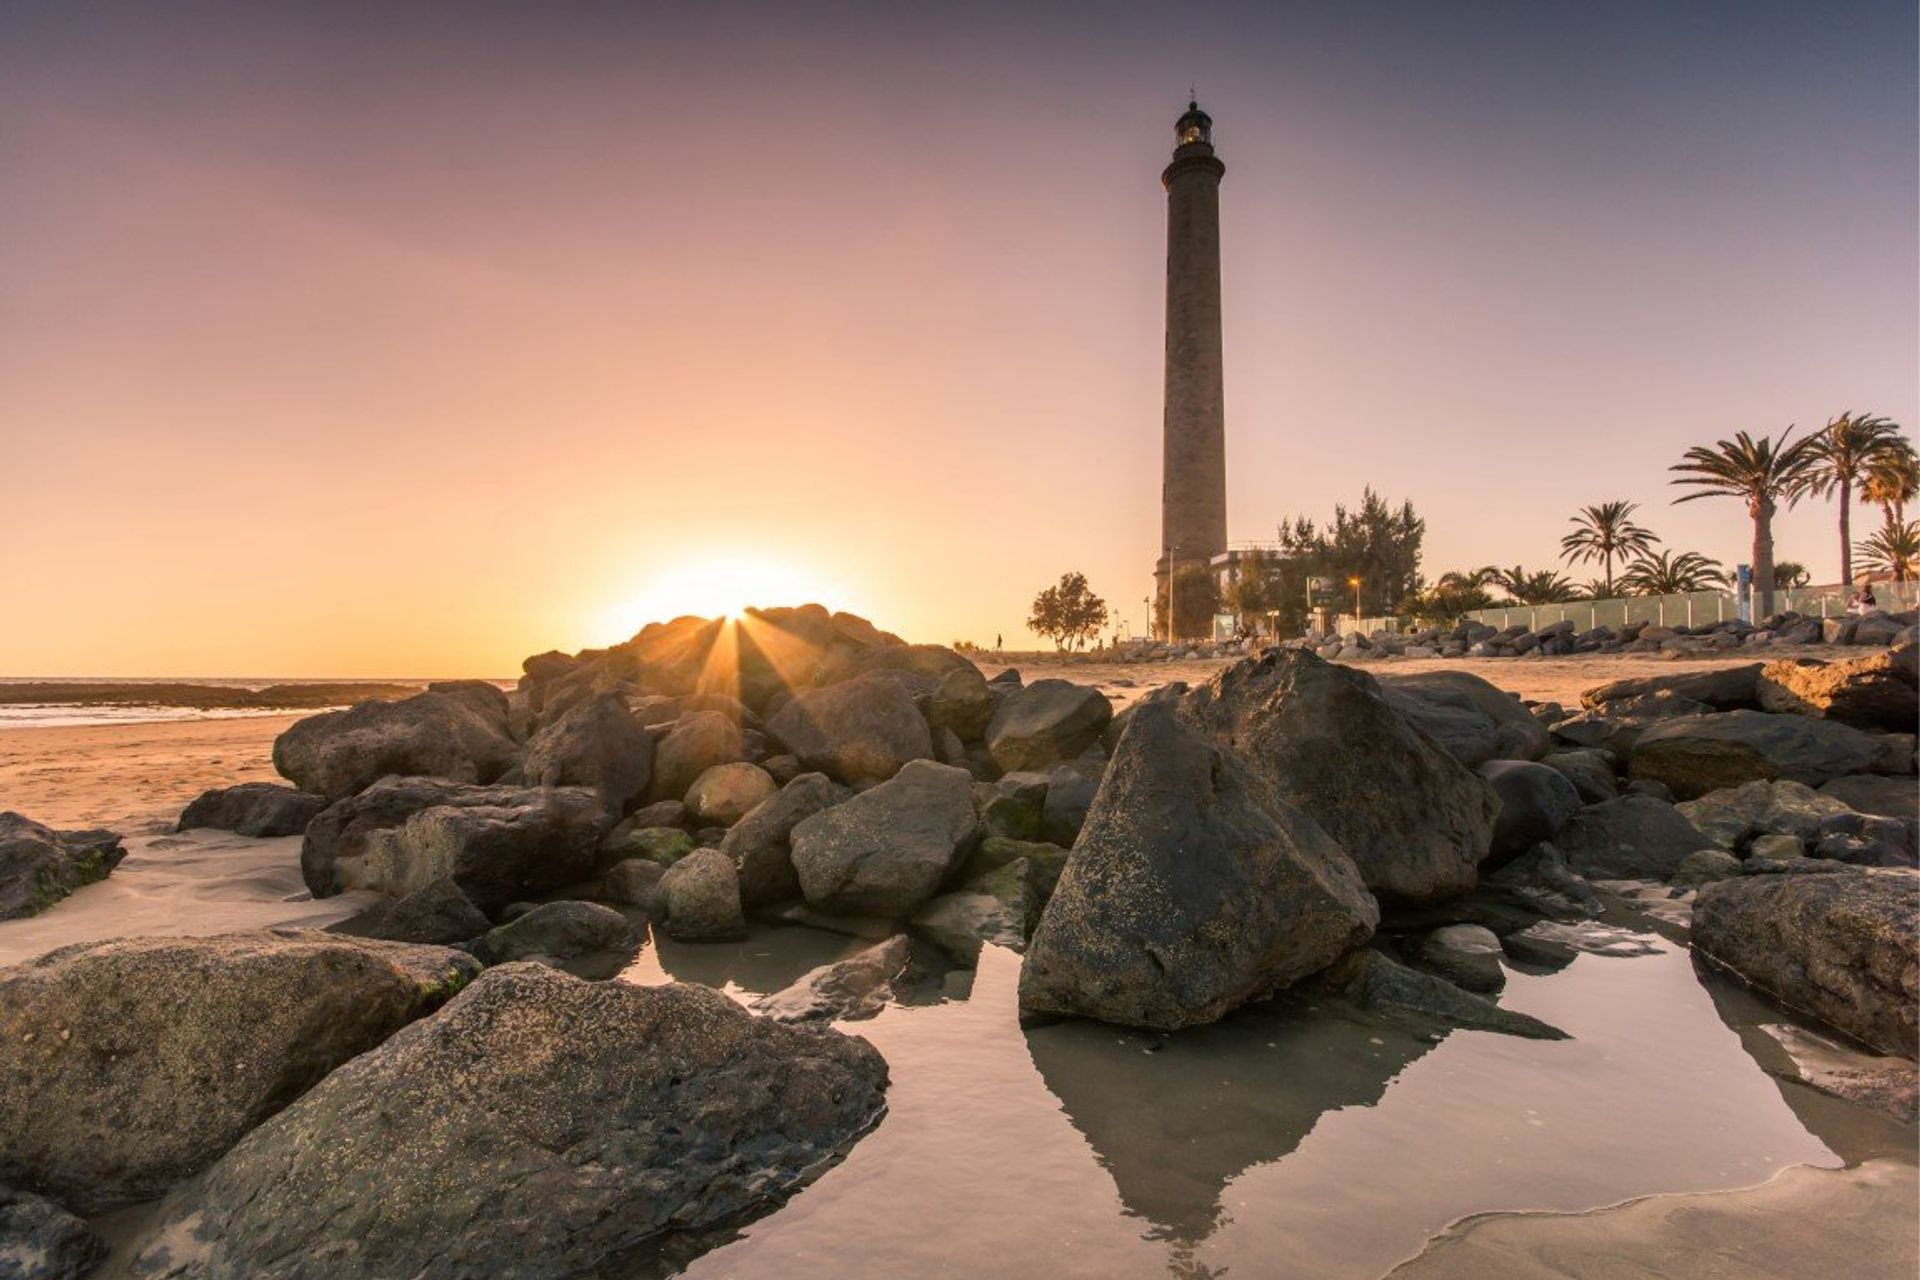 19th century Maspalomas Lighthouse is one of the most visited landmarks on the island